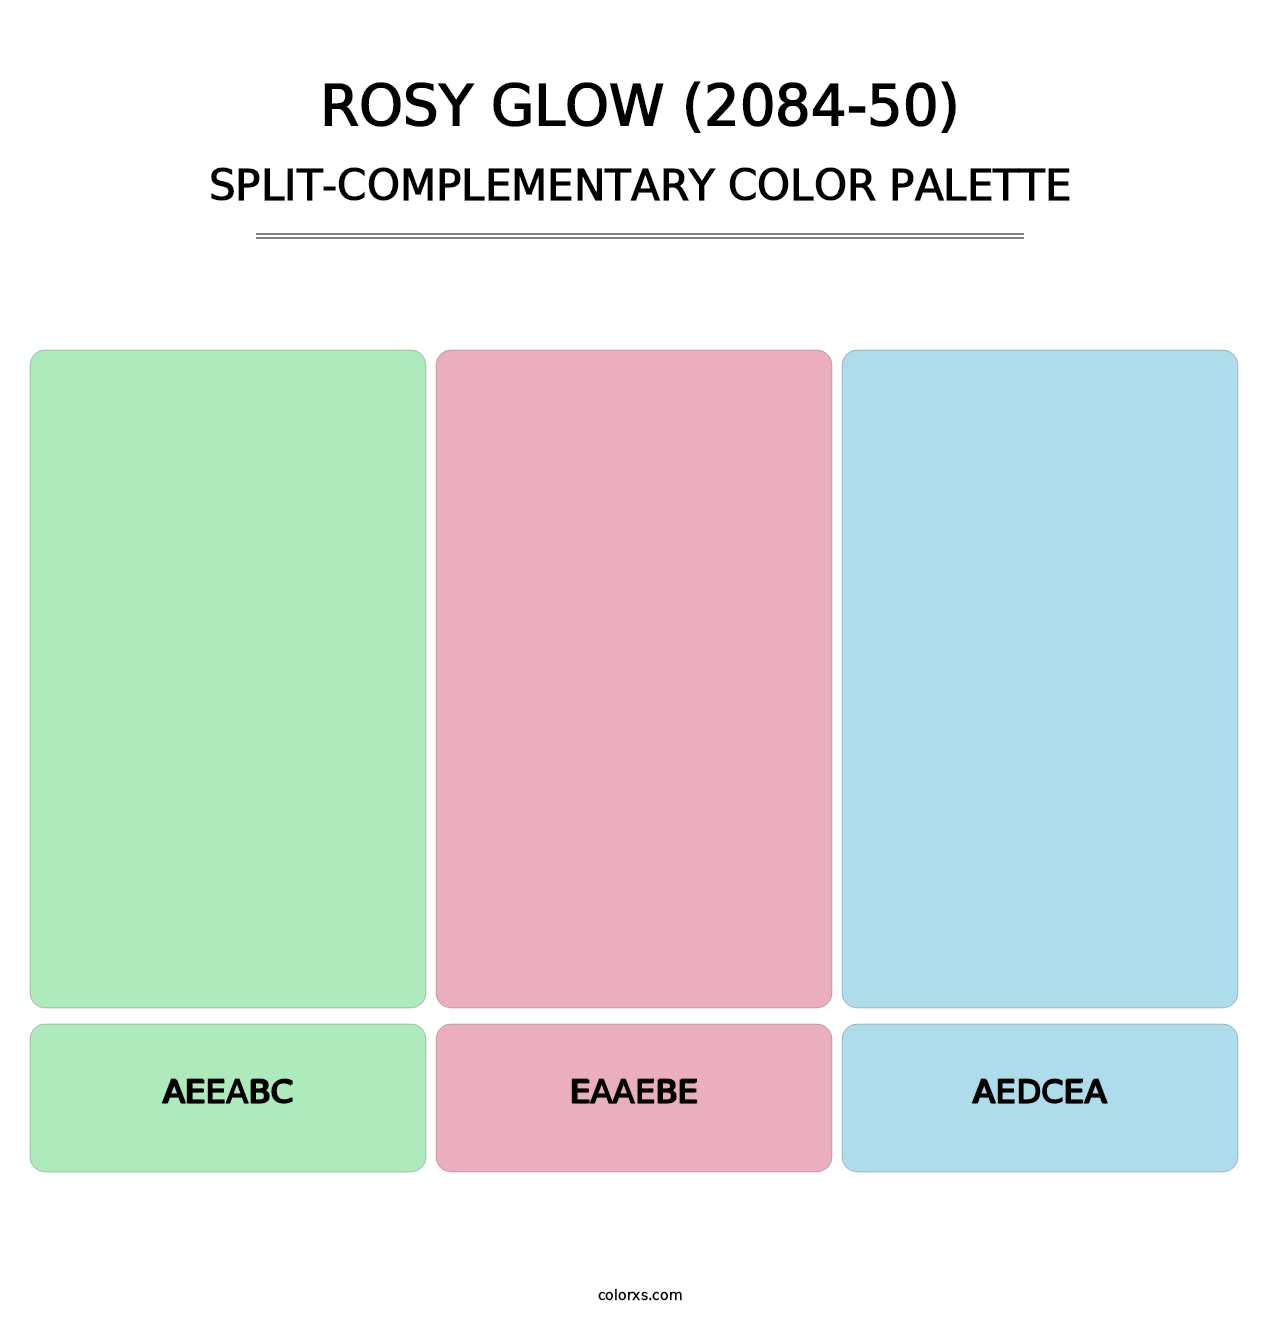 Rosy Glow (2084-50) - Split-Complementary Color Palette